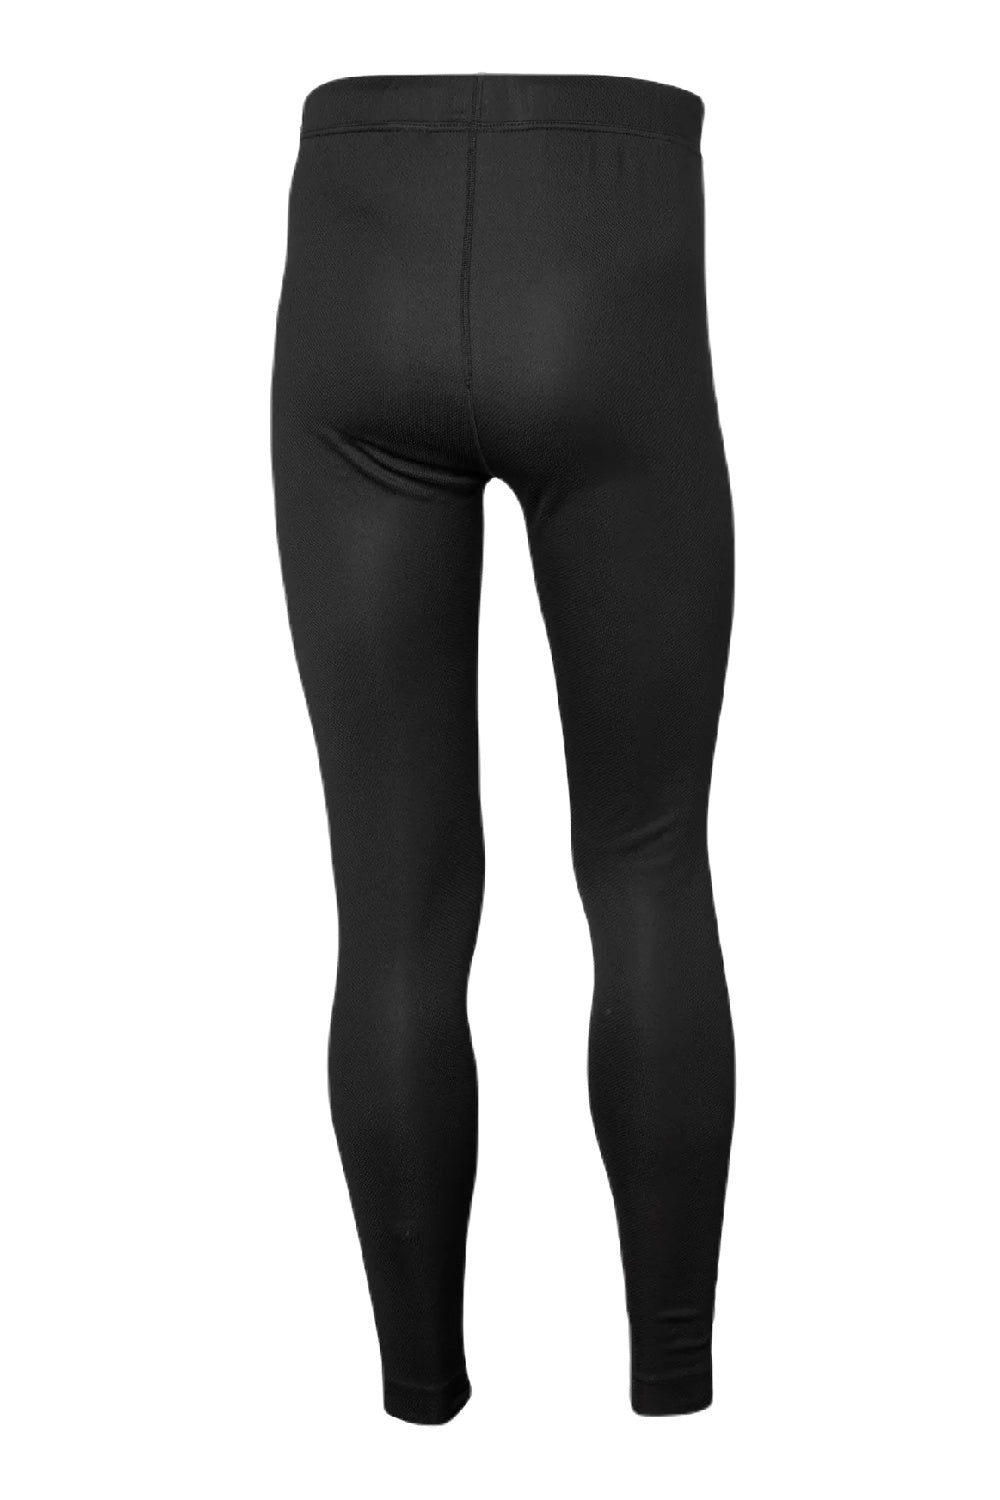 Helly Hansen Lifa Base Layer Pant in Black